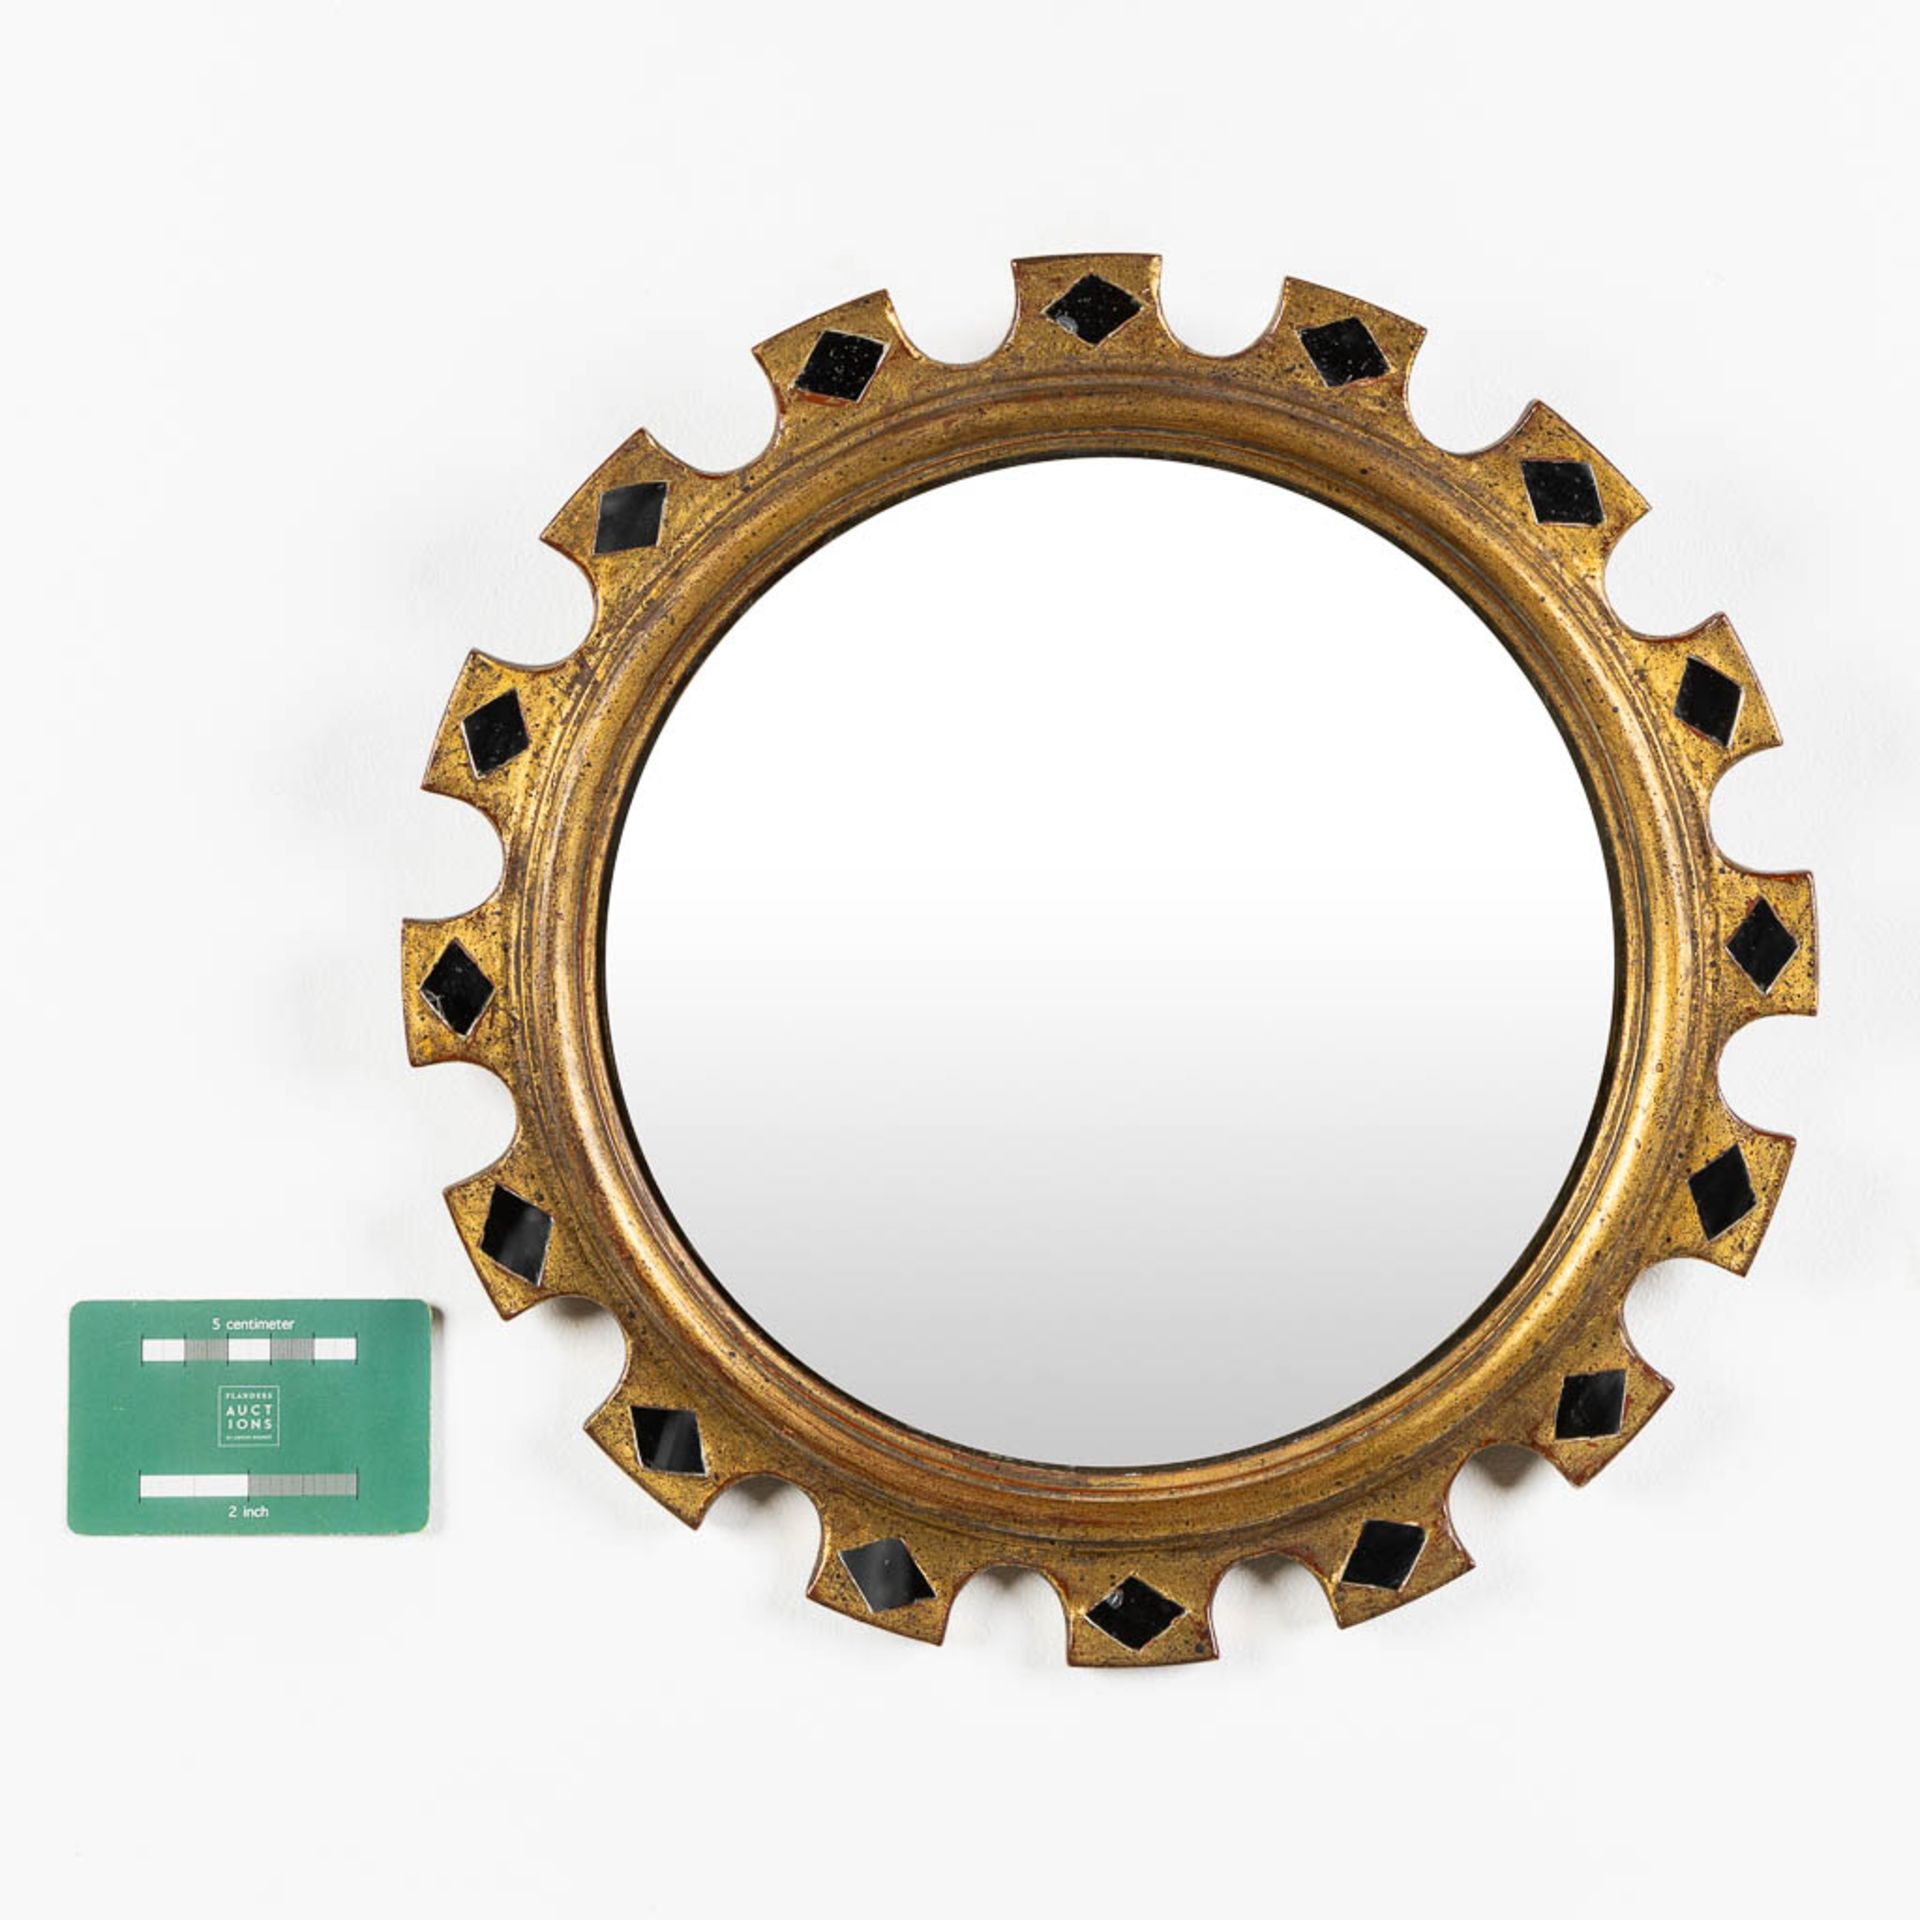 A mid-century sunburst mirror, sculptured wood inlaid with glass diamond shapes. (D:33 cm) - Image 2 of 6